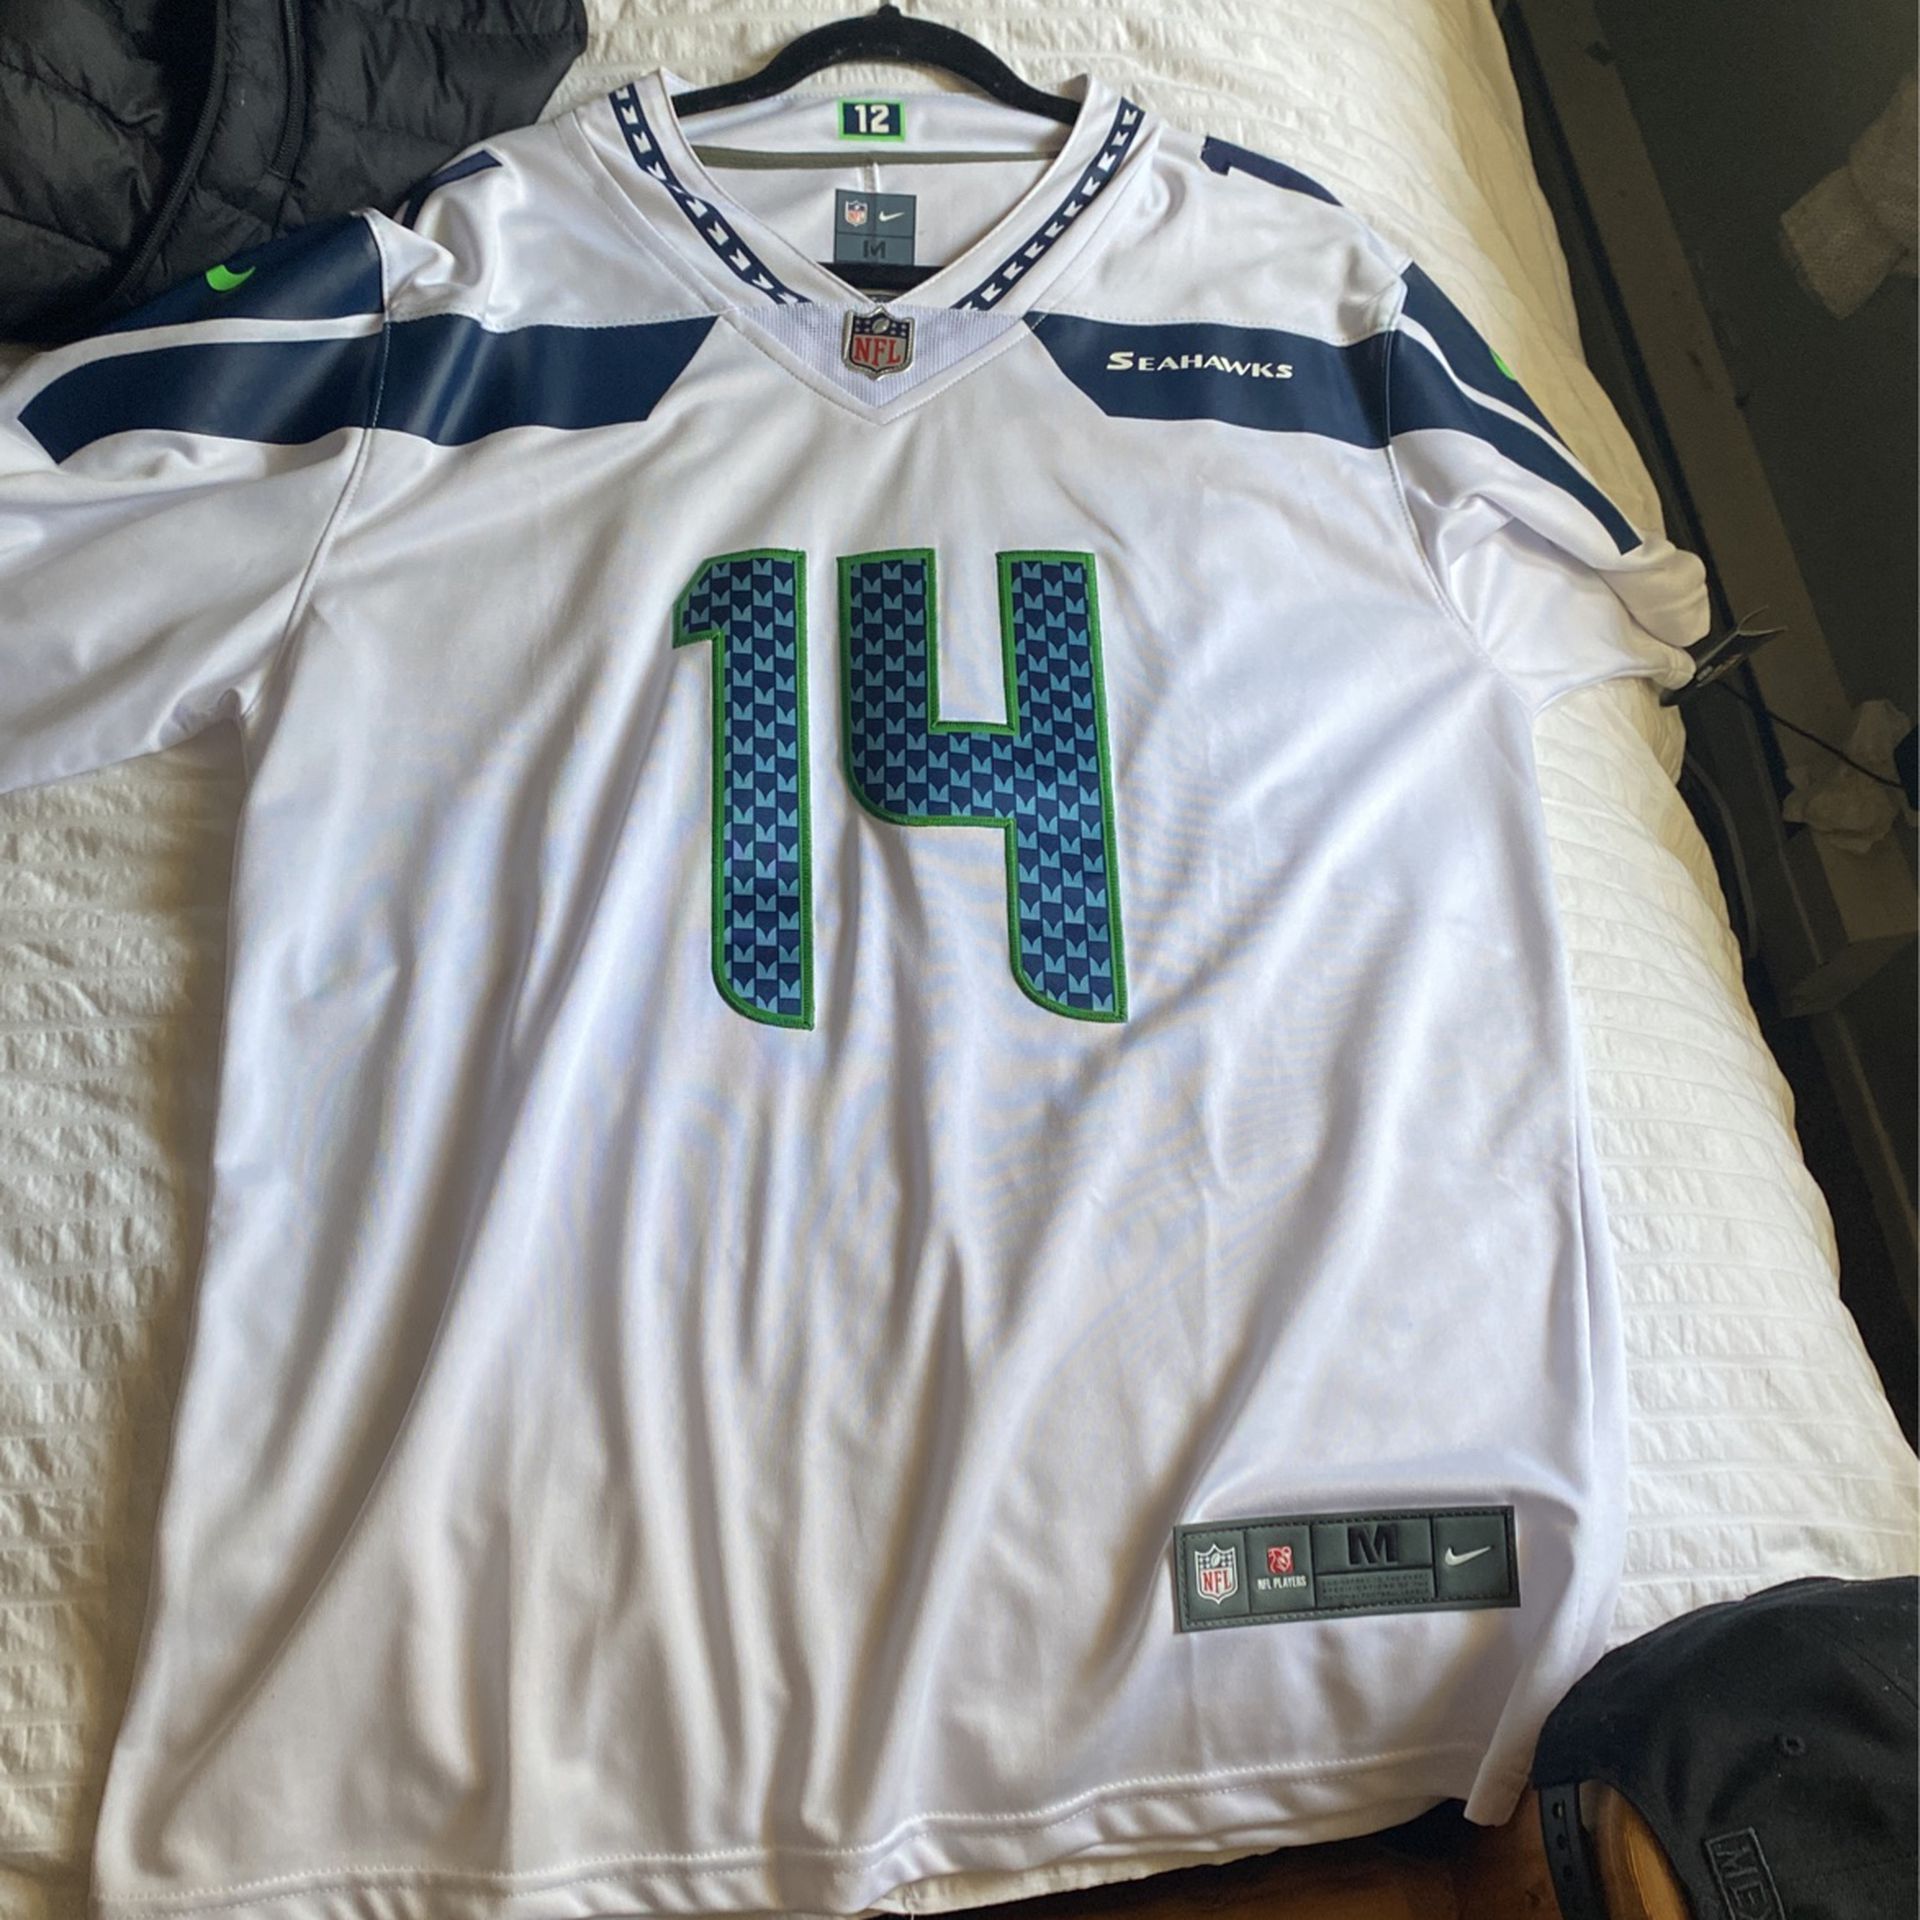 DK Metcalf Jersey for Sale in Spanaway, WA - OfferUp